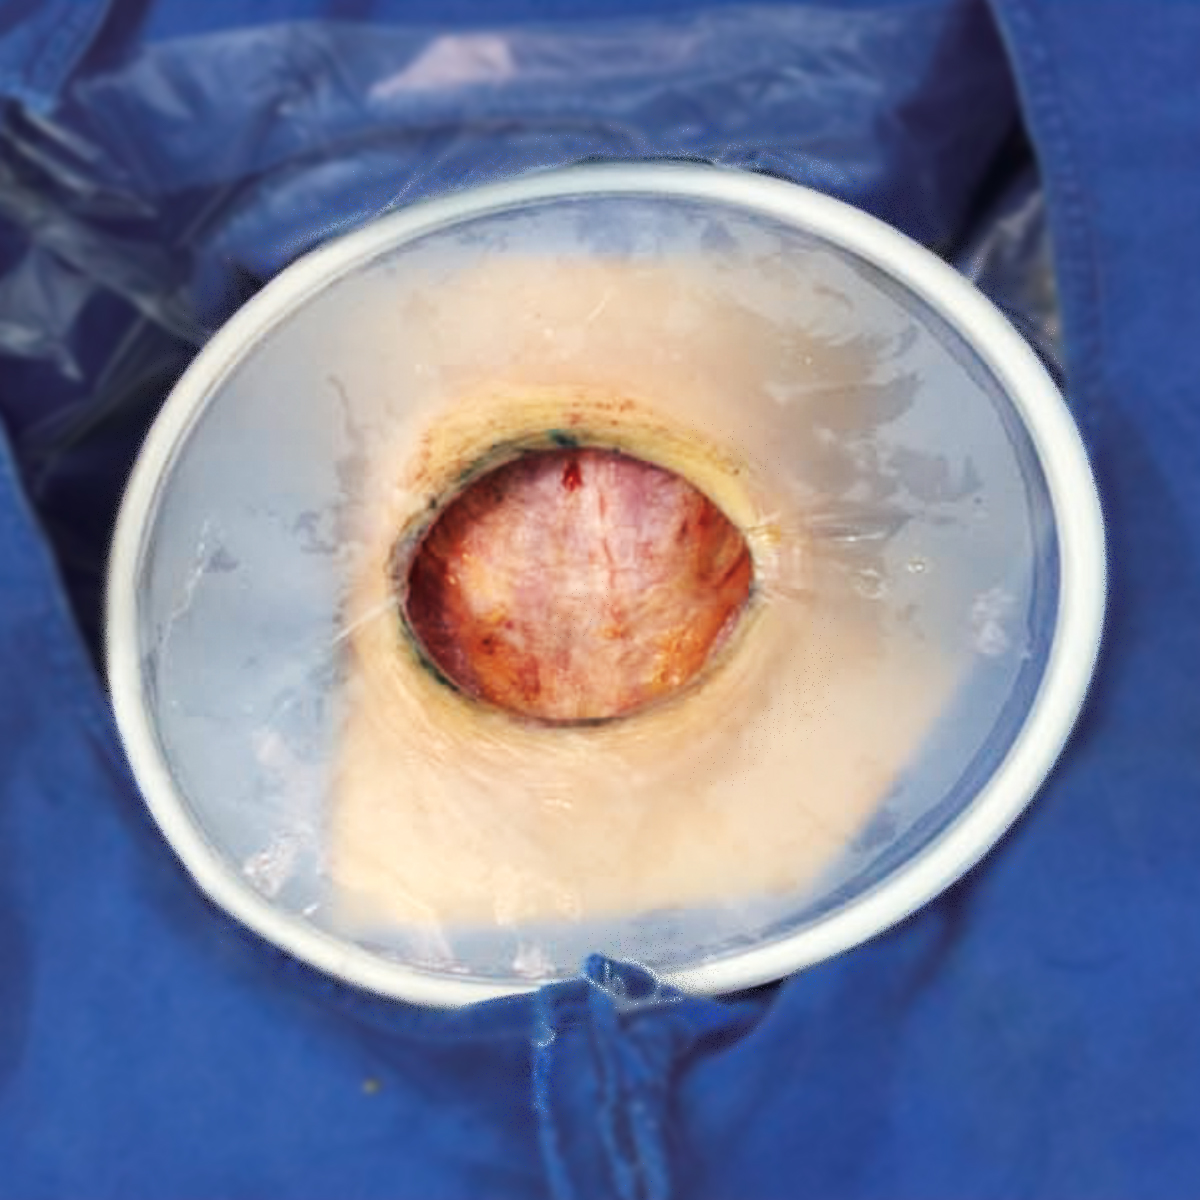 Dual-Ring, Fixed-Height Wound Protector In Use During Surgery